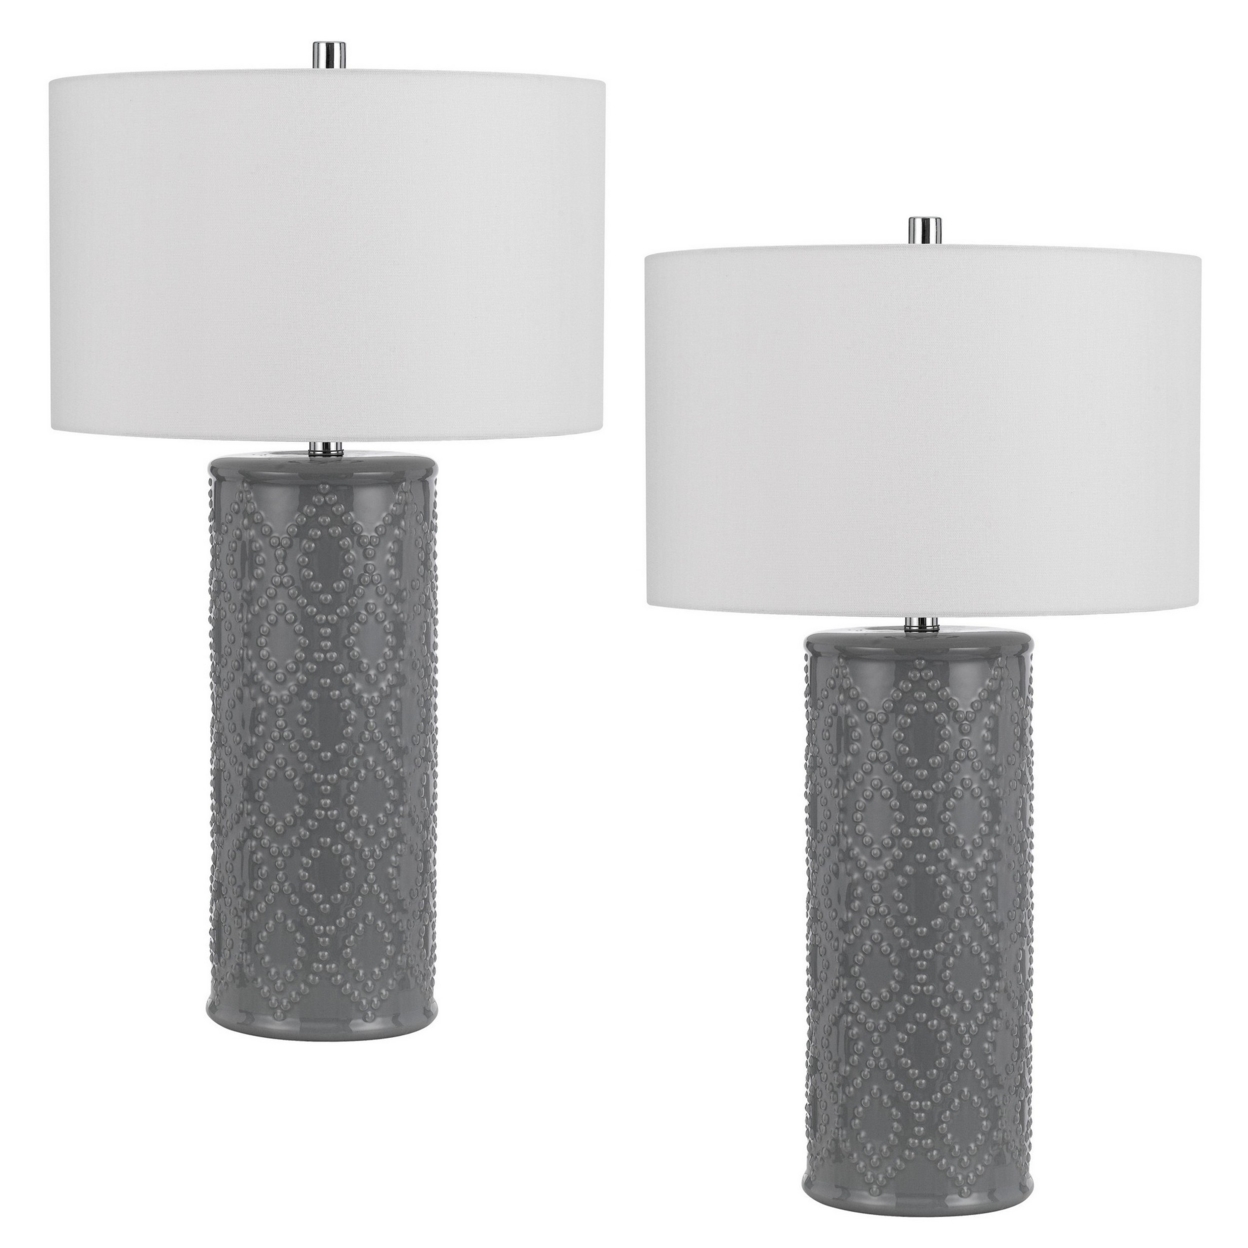 29 Inch Accent Table Lamp Set Of 2, Tall Cylinder, Ball Finial Accent, Gray- Saltoro Sherpi